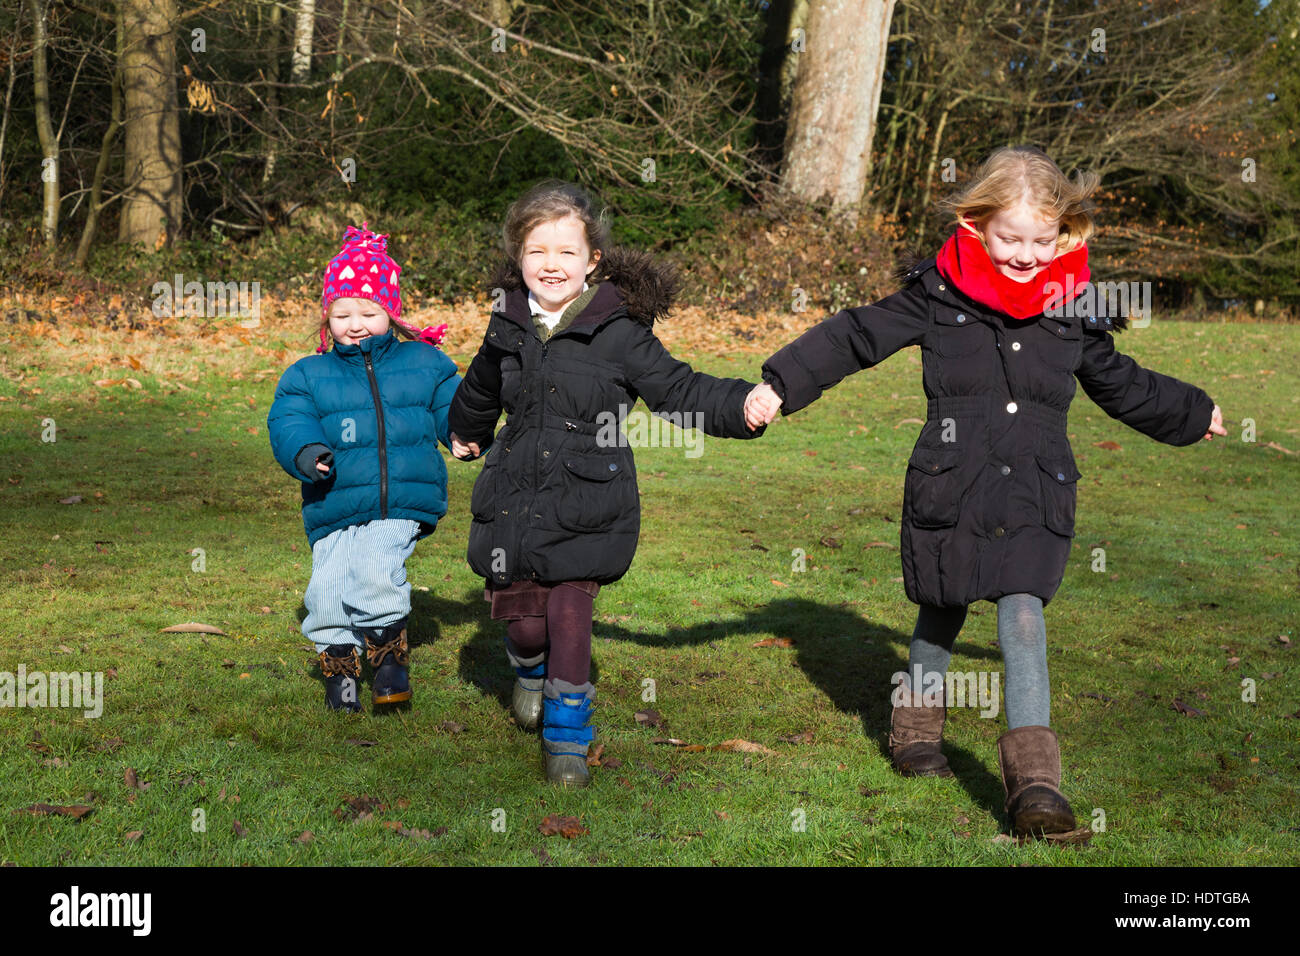 Three sisters: girls age 4, 2 & 6 years, four, two, and six year old, running run play in grass park / parkland / UK autumn. Stock Photo